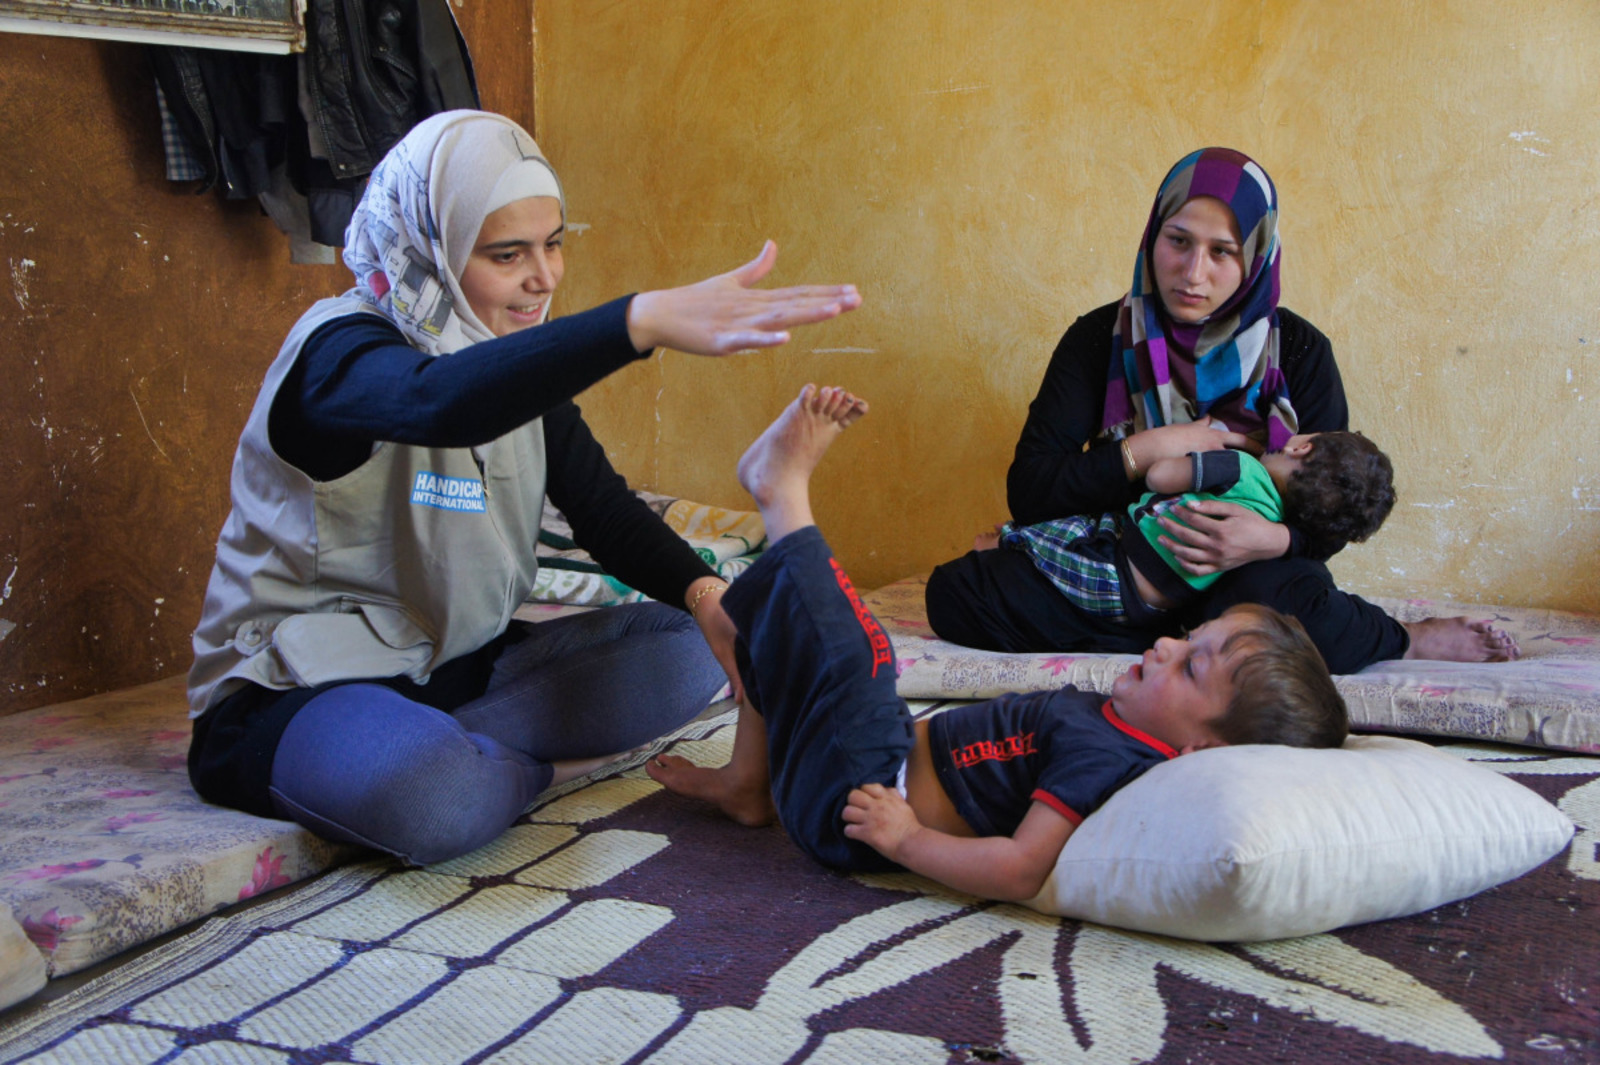 Fayez lies on his back and lifts his leg to touch Mariam's hand as part of his rehabilitation exercises.